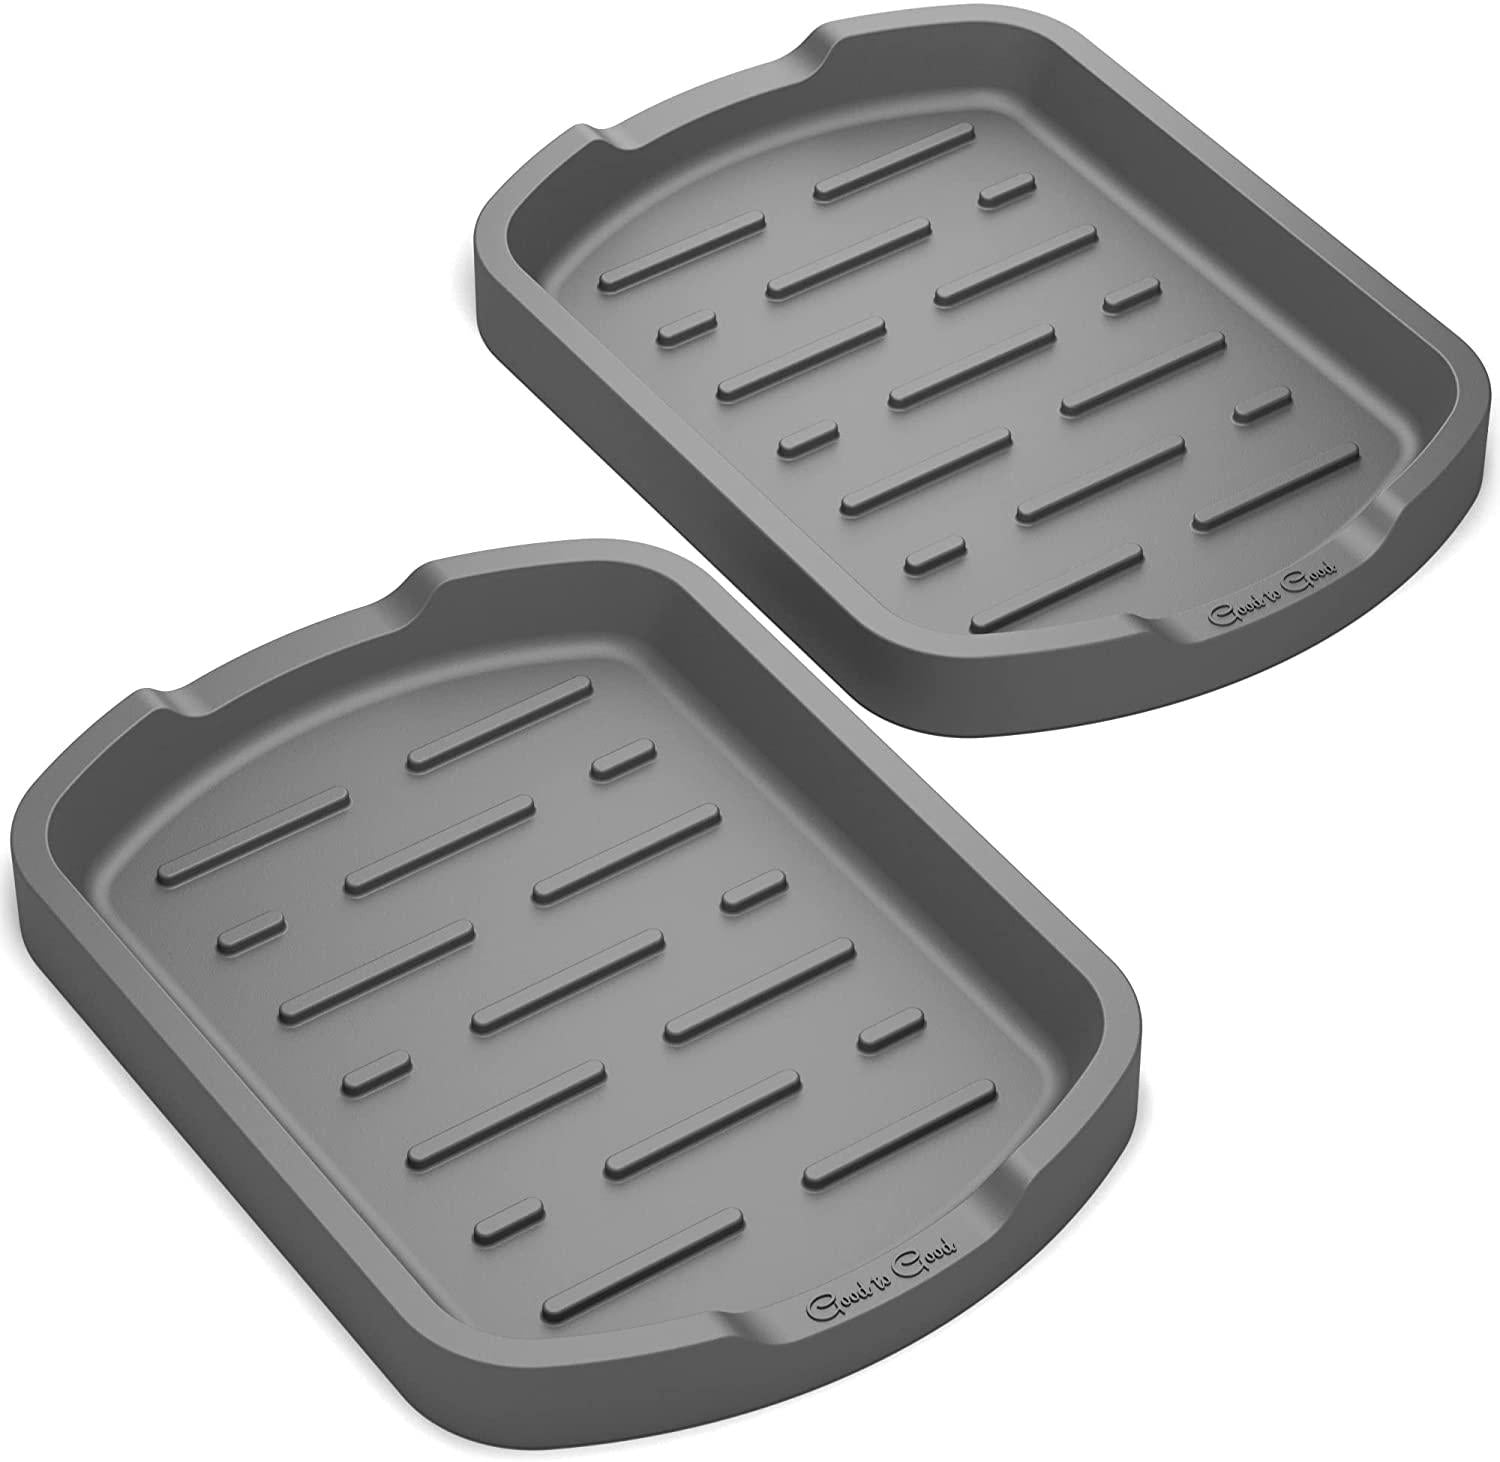 GOOD TO GOOD, Good to Good Silicone Organizer Tray Set of 2 - Multipurpose use Like Spoon Rest Sponge Holder soap Holder Gray